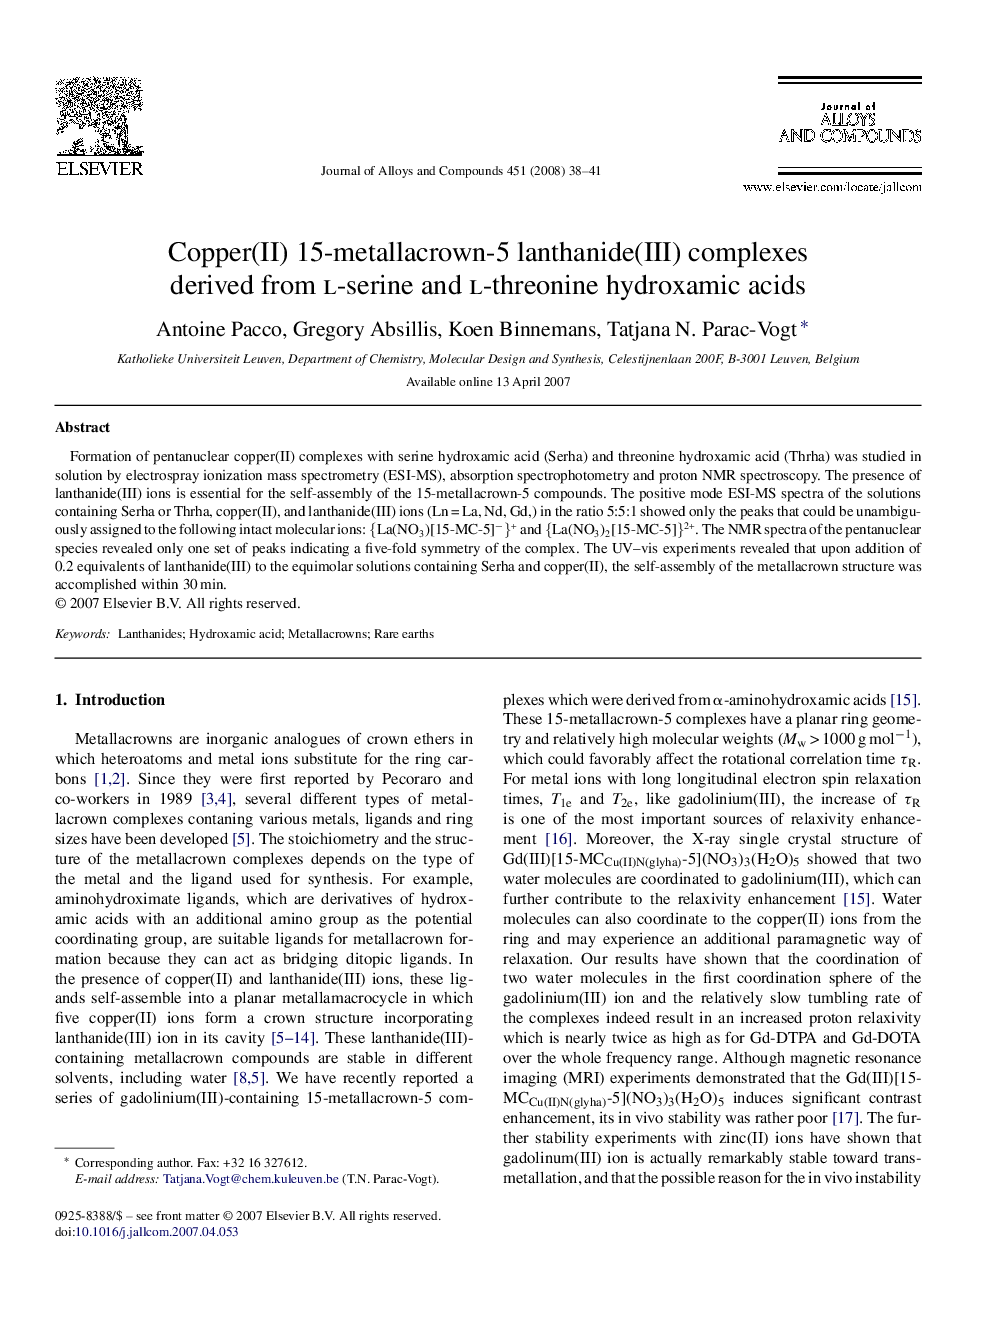 Copper(II) 15-metallacrown-5 lanthanide(III) complexes derived from l-serine and l-threonine hydroxamic acids